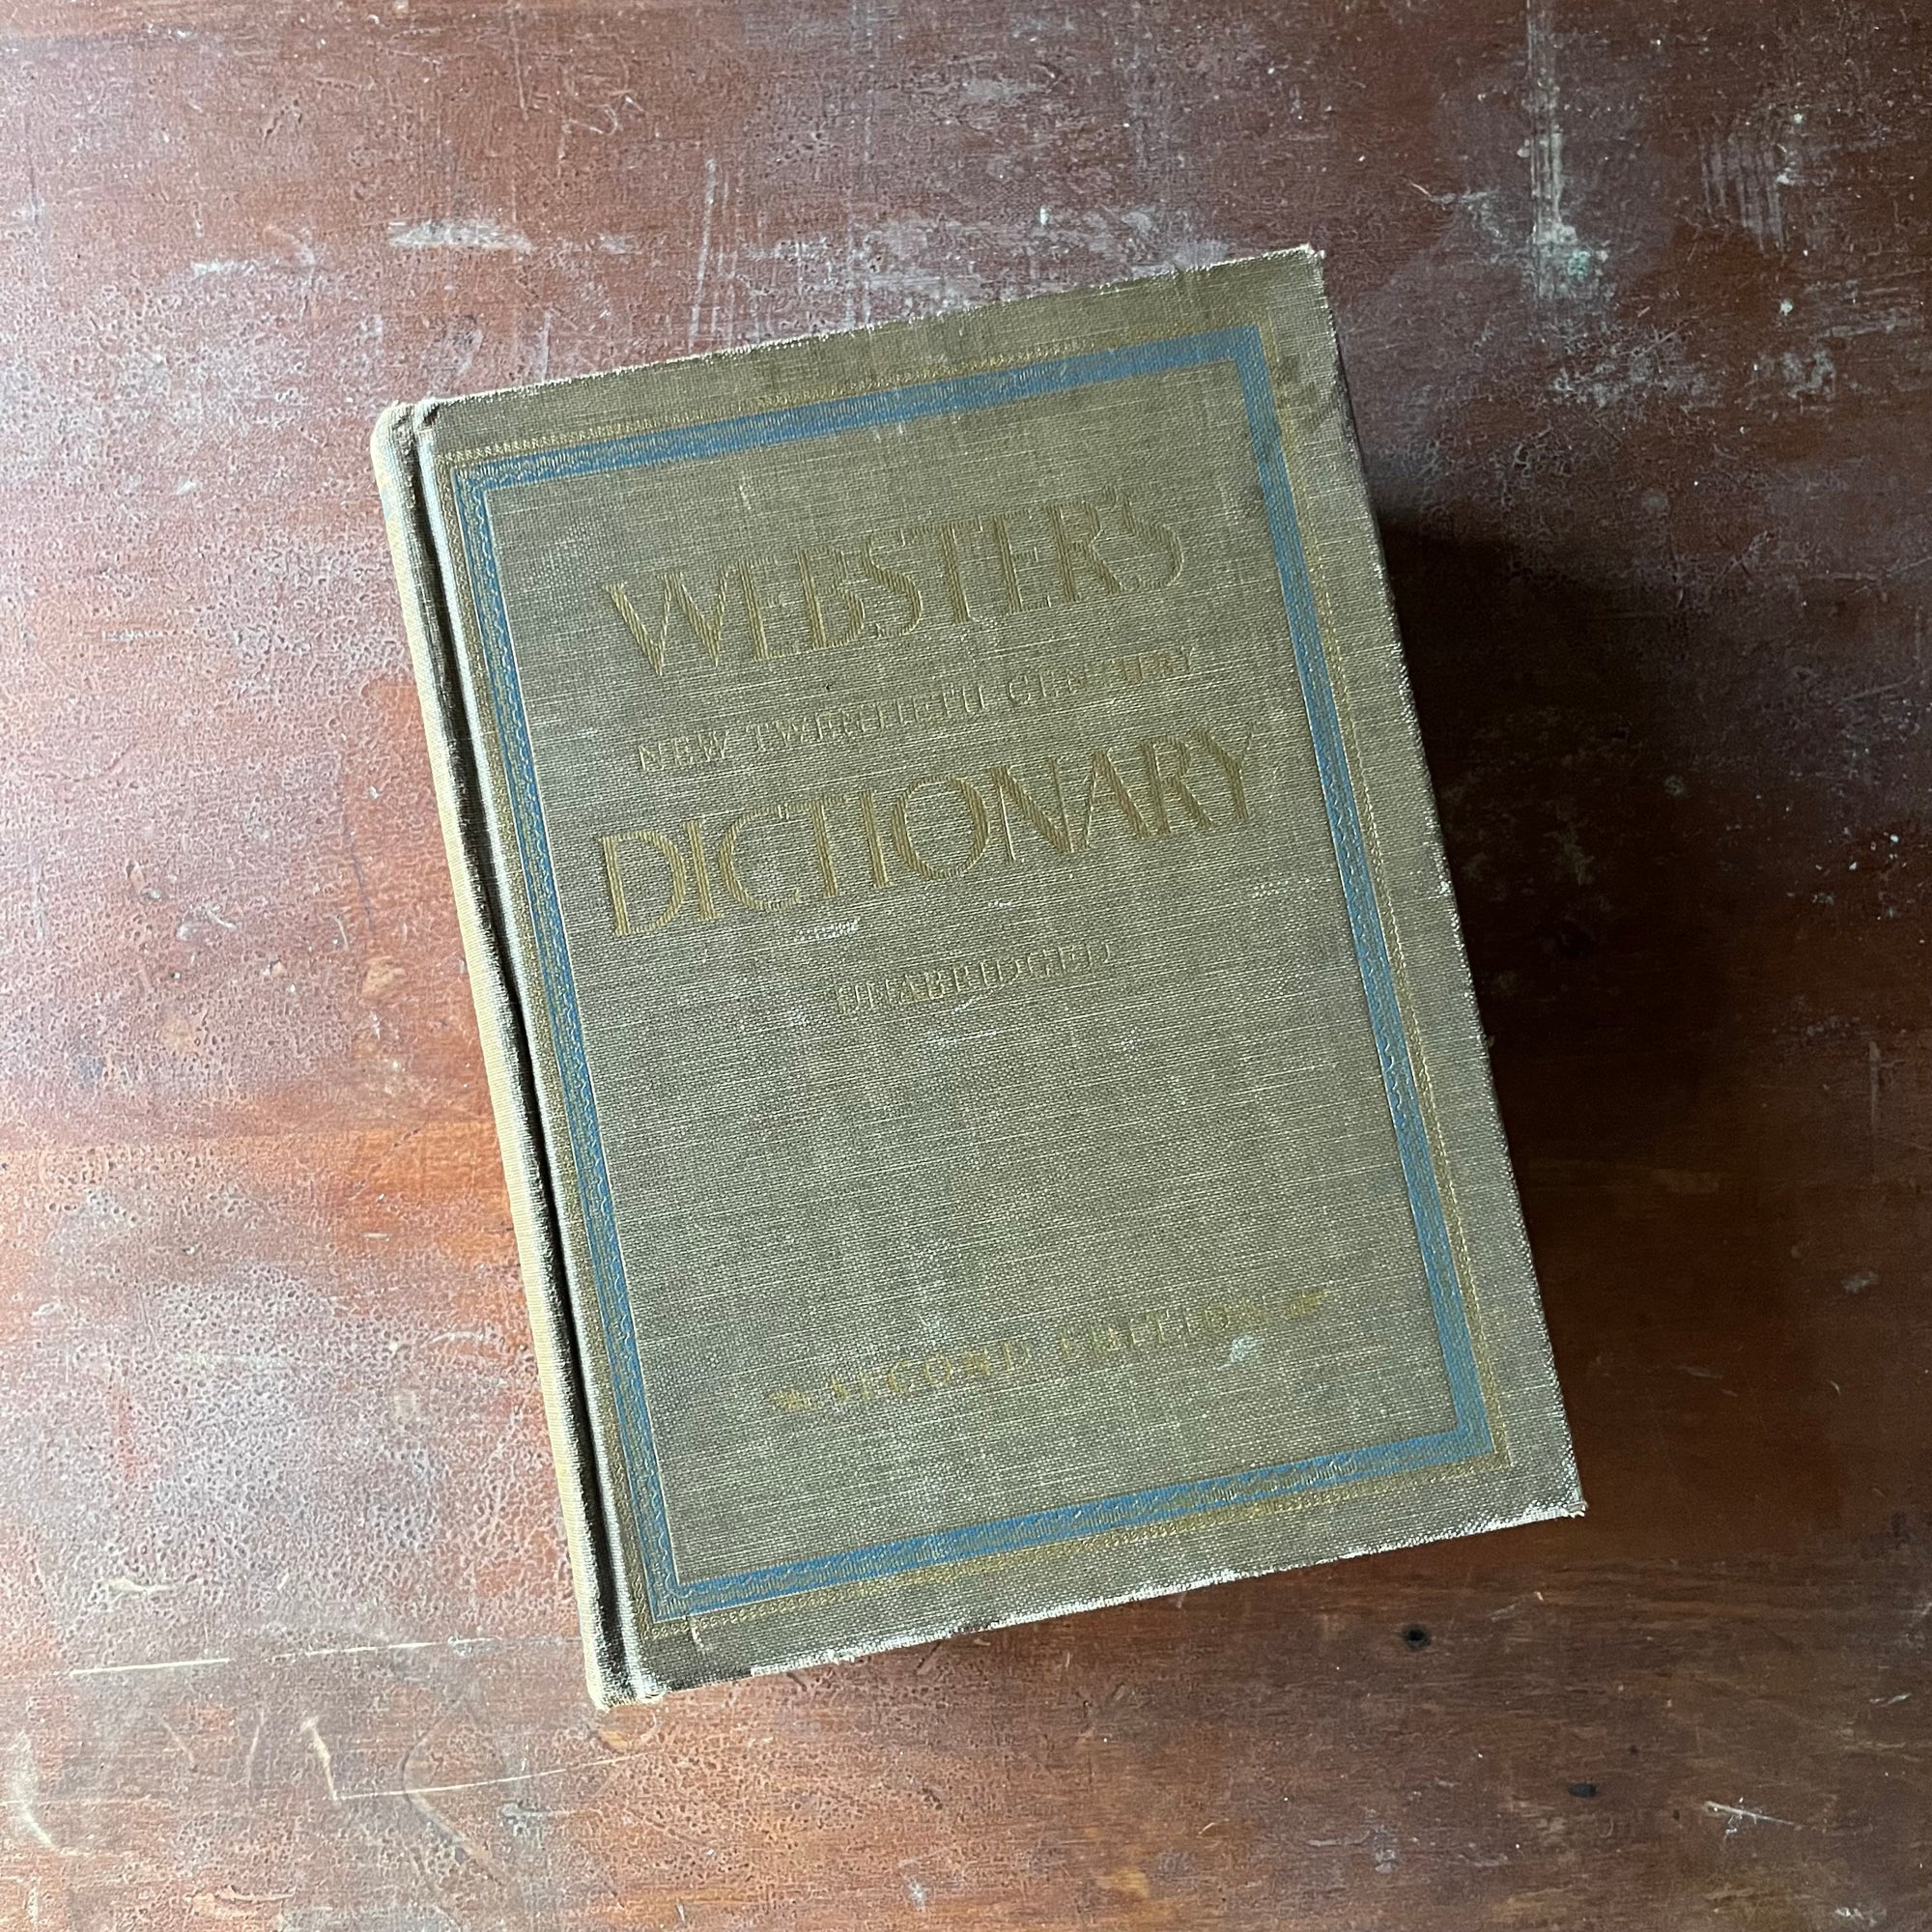 Webster's New Twentieth Century Unabridged Dictionary-1968 Edition-vintage dictionary-view of the front cover in gray with a blue border & gold writing